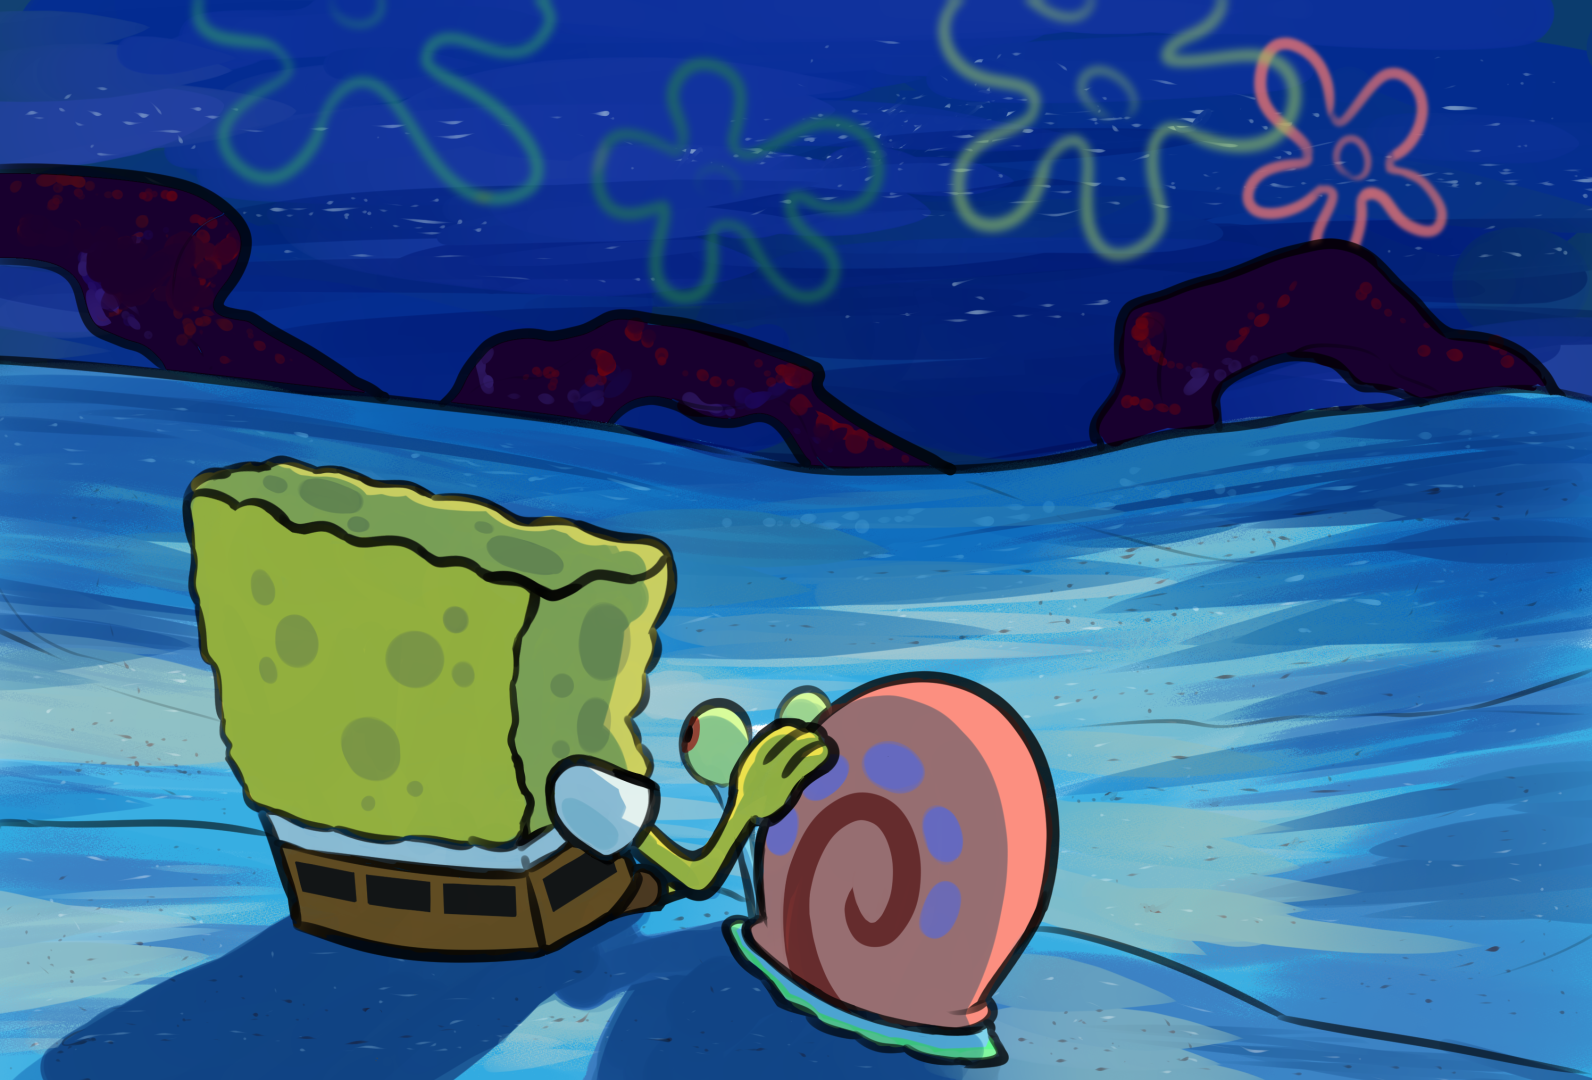 An illustration of Spongebob and Gary from Spongebob Squarepants looking out over an open underwater landscape at night.